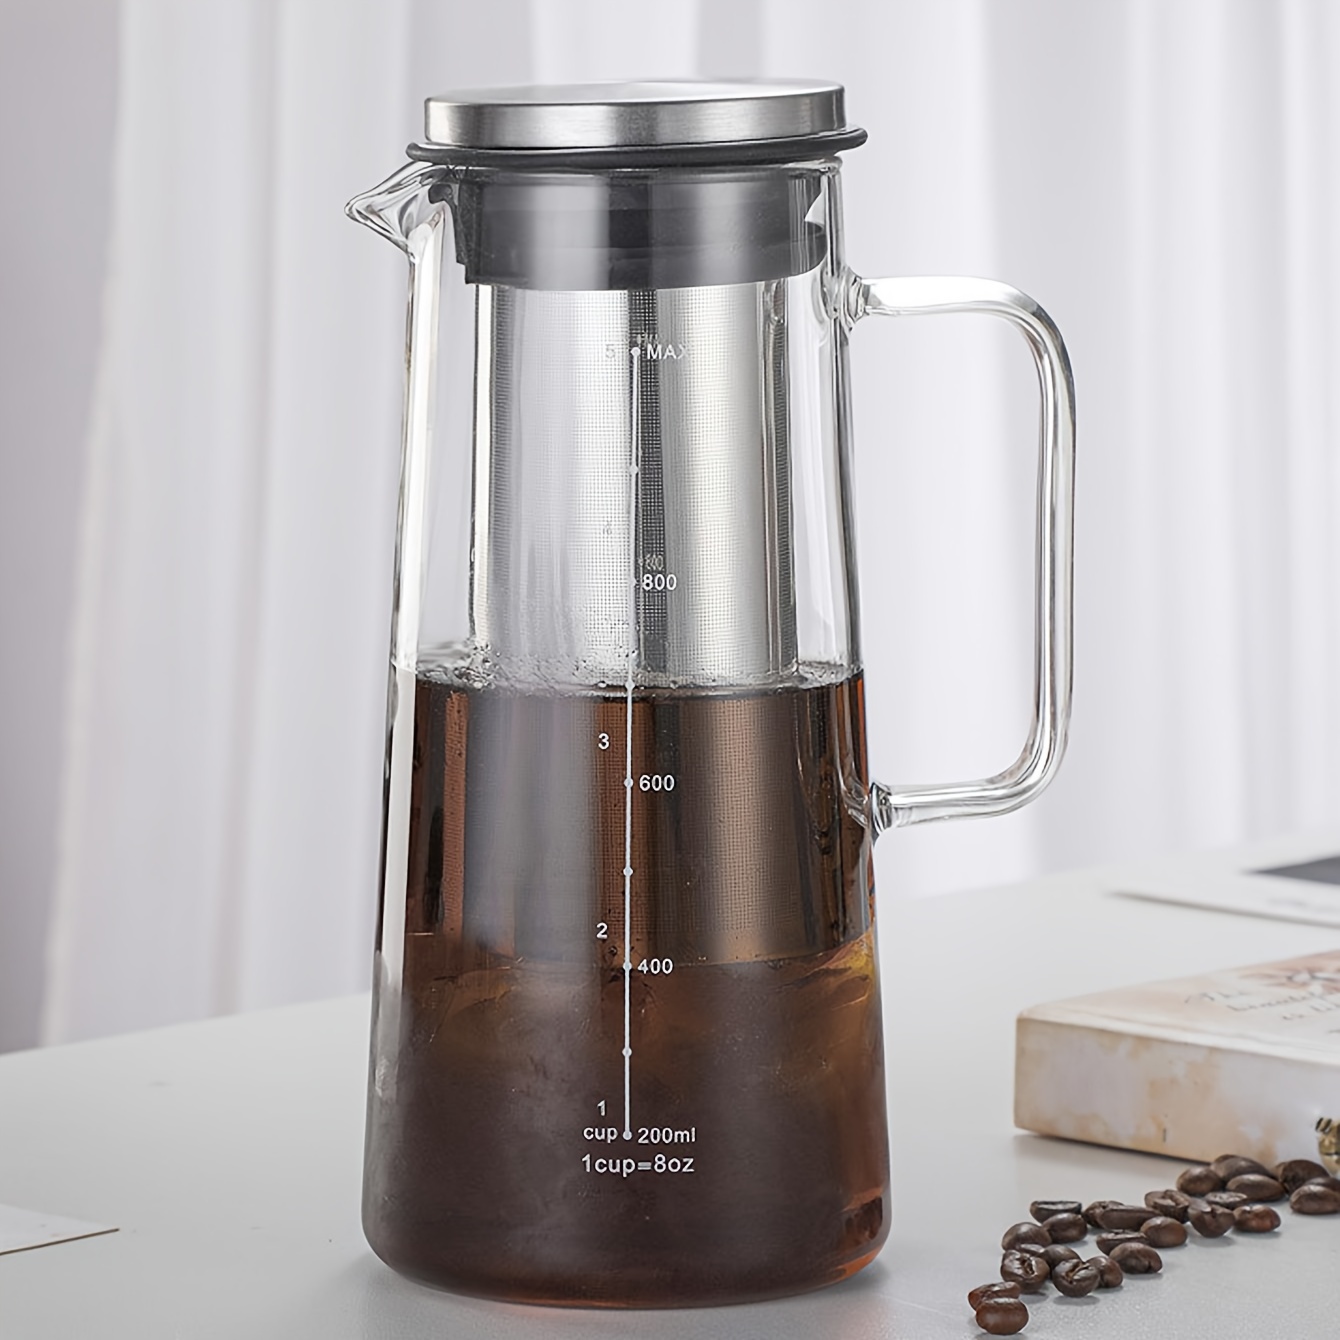 Cold Brew Coffee Maker with Stand - 1 Gallon Extra-Thick Glass Carafe & Stainless Steel Mesh Filter and Spigot - Premium Iced Coffee Maker, Cold